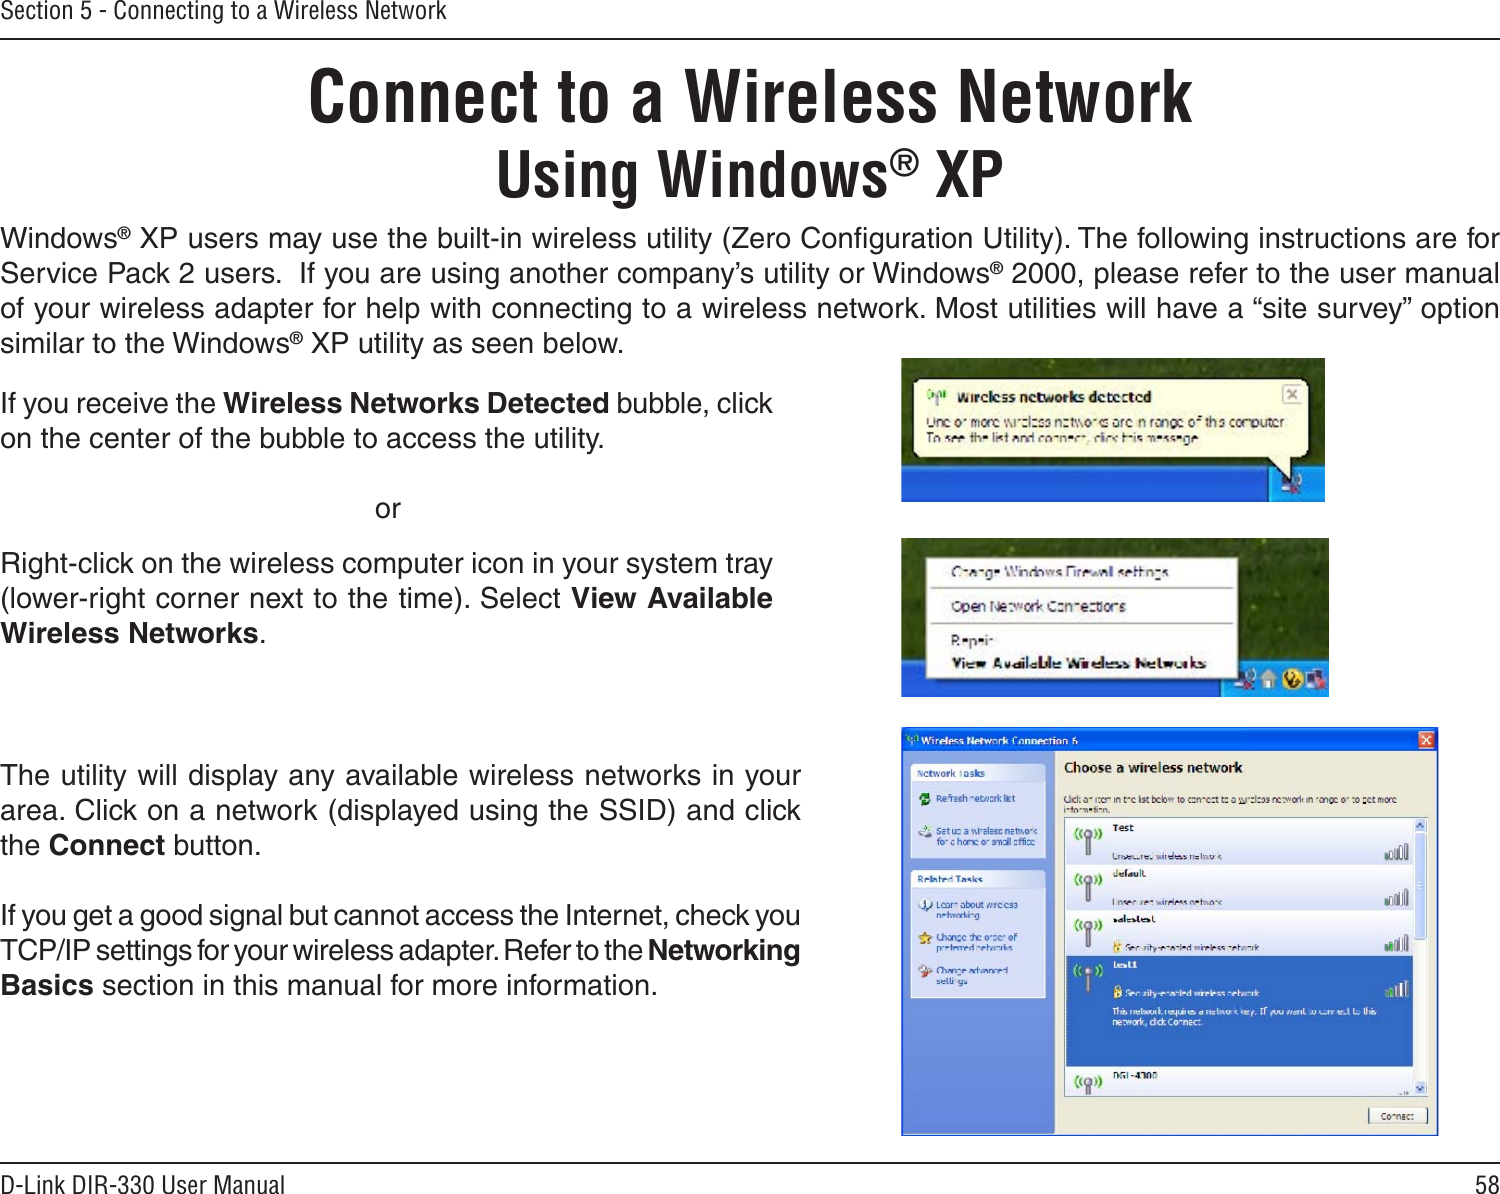 58D-Link DIR-330 User ManualSection 5 - Connecting to a Wireless NetworkConnect to a Wireless NetworkUsing Windows® XPWindows® XP users may use the built-in wireless utility (Zero Conﬁguration Utility). The following instructions are for Service Pack 2 users.  If you are using another company’s utility or Windows® 2000, please refer to the user manual of your wireless adapter for help with connecting to a wireless network. Most utilities will have a “site survey” option similar to the Windows® XP utility as seen below.Right-click on the wireless computer icon in your system tray (lower-right corner next to the time). Select View Available Wireless Networks.If you receive the Wireless Networks Detected bubble, click on the center of the bubble to access the utility.     orThe utility will display any available wireless networks in your area. Click on a network (displayed using the SSID) and click the Connect button.If you get a good signal but cannot access the Internet, check you TCP/IP settings for your wireless adapter. Refer to the Networking Basics section in this manual for more information.